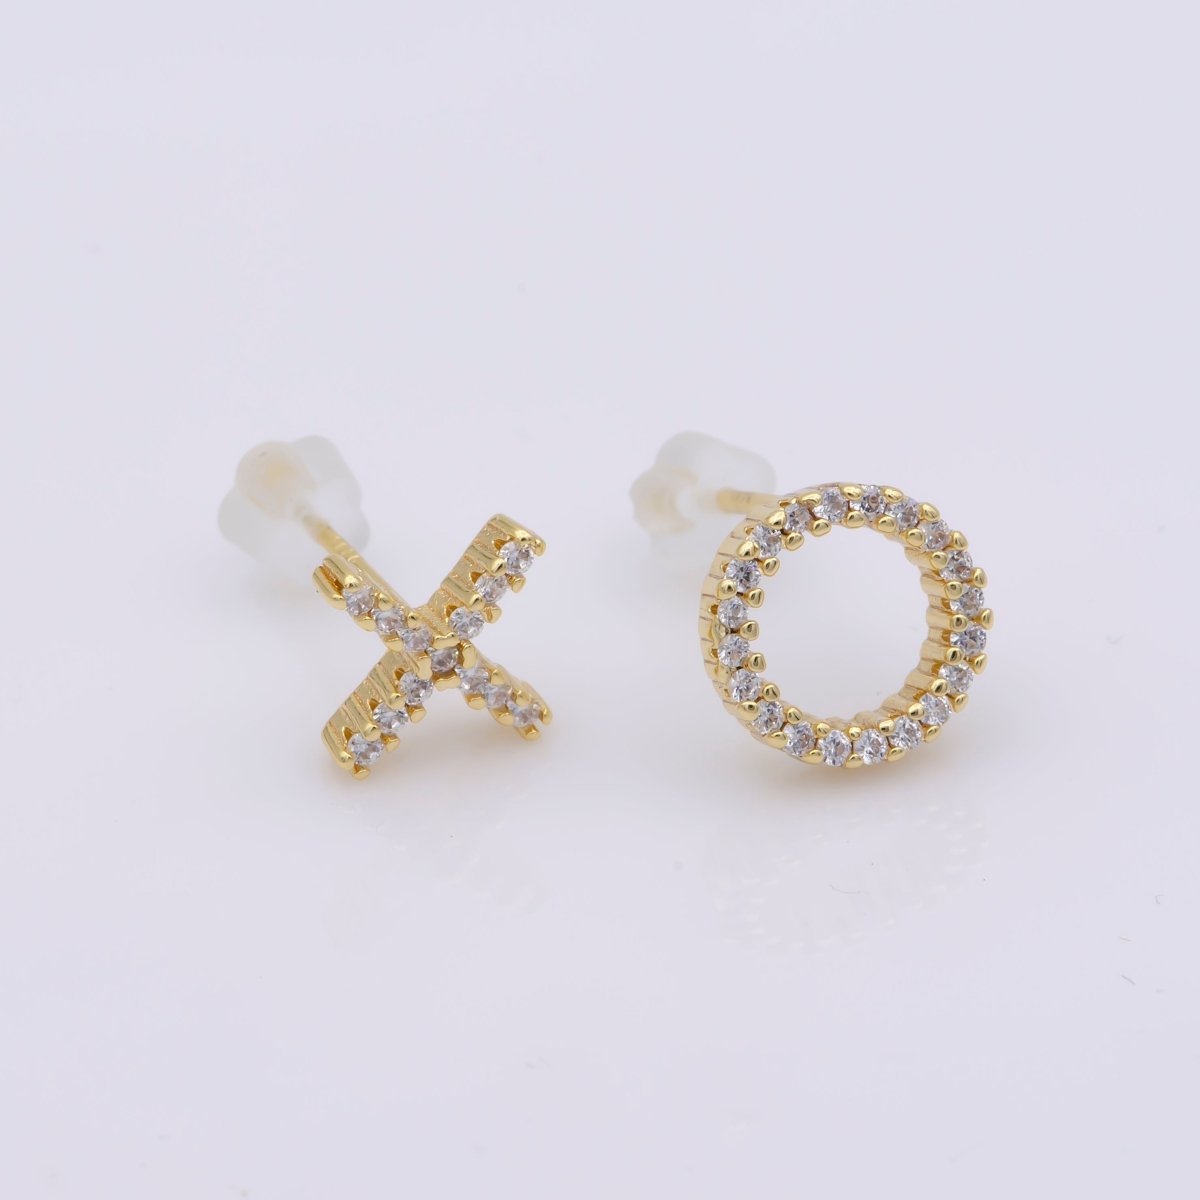 14K Gold Filled tiny XO stud earrings, Tiny stud, Cartilage stud, XO studs, Helix stud, XO earrings, hugs and kisses earrings , x studs AE-801 - DLUXCA